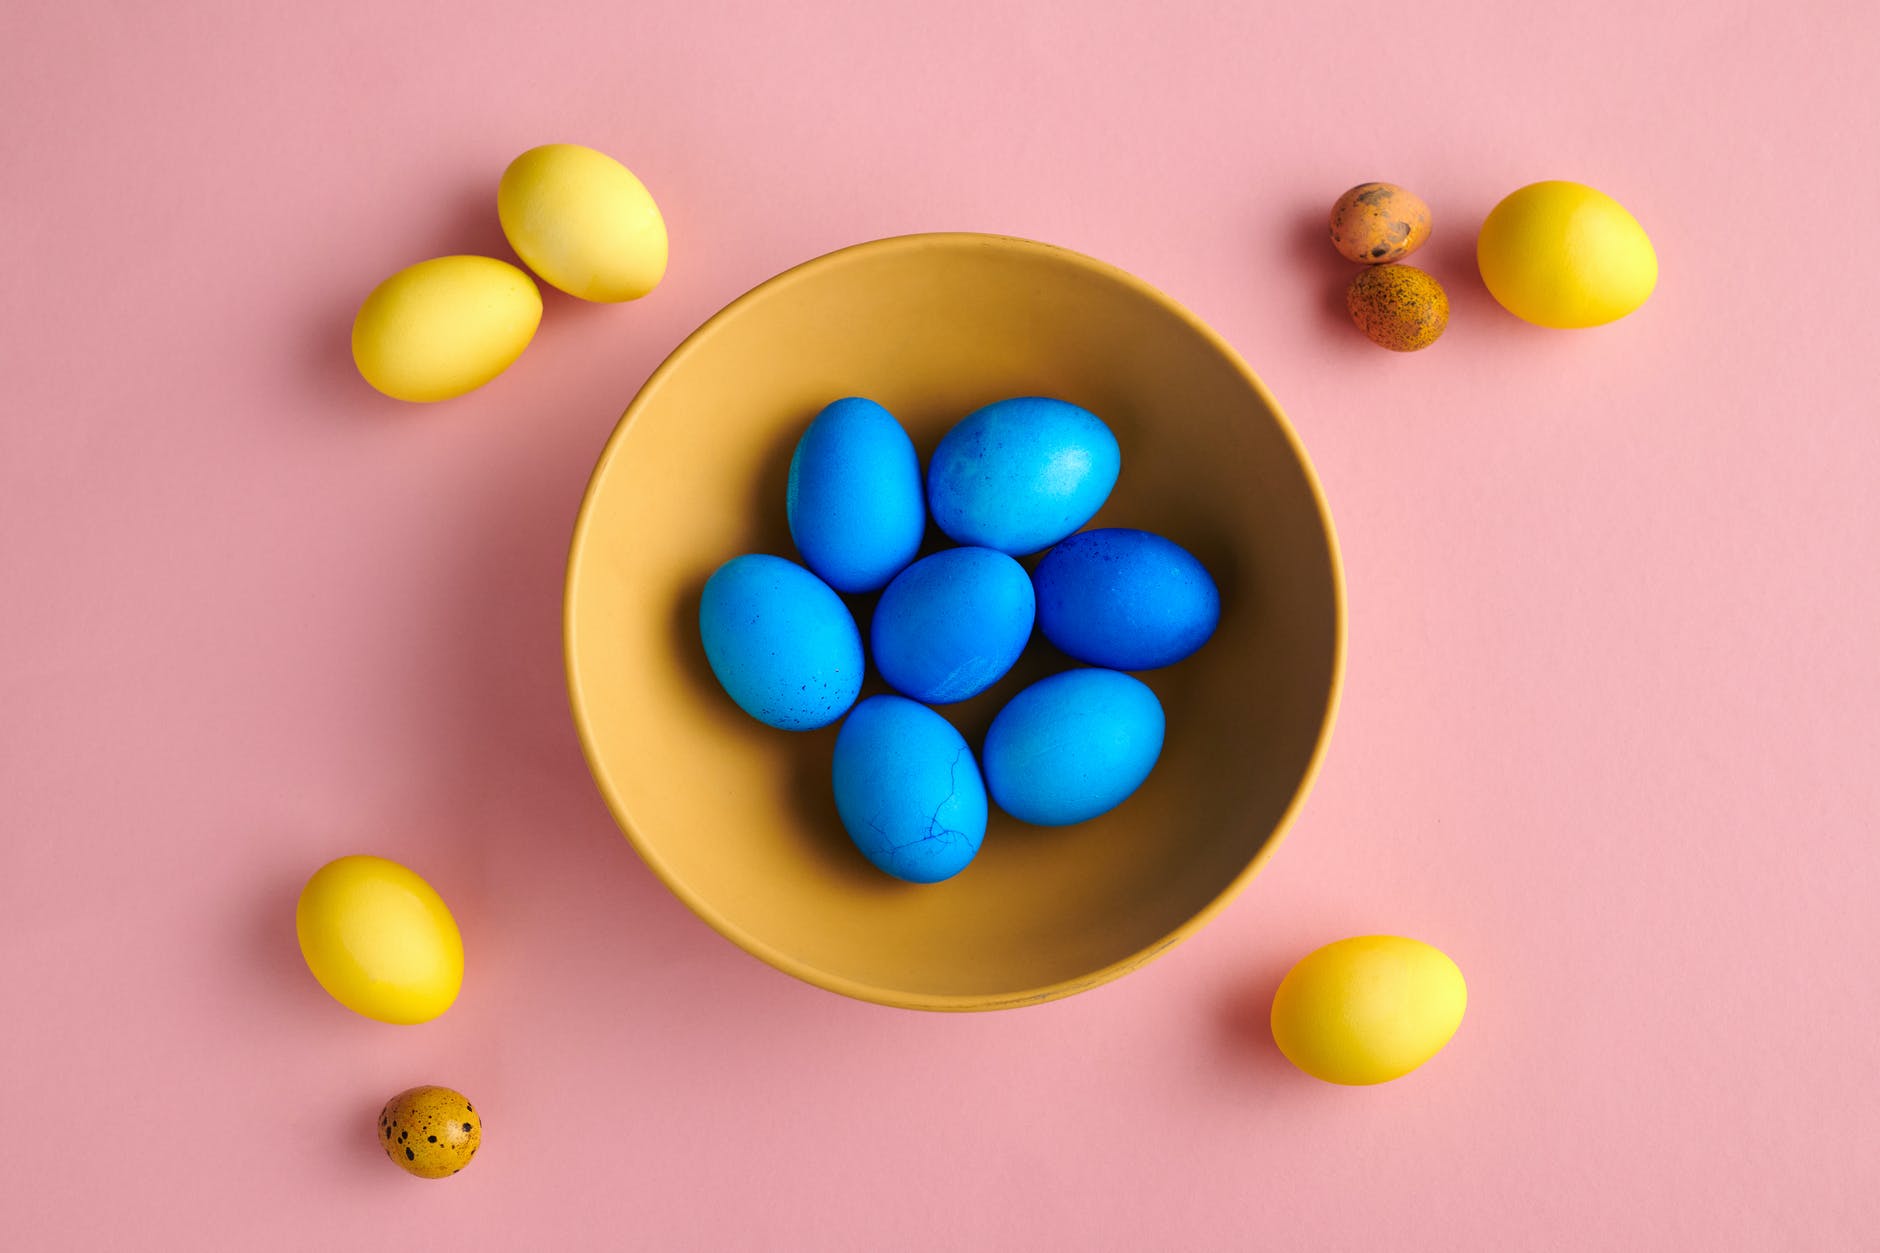 blue eggs on bowl with yellow eggs on pink background